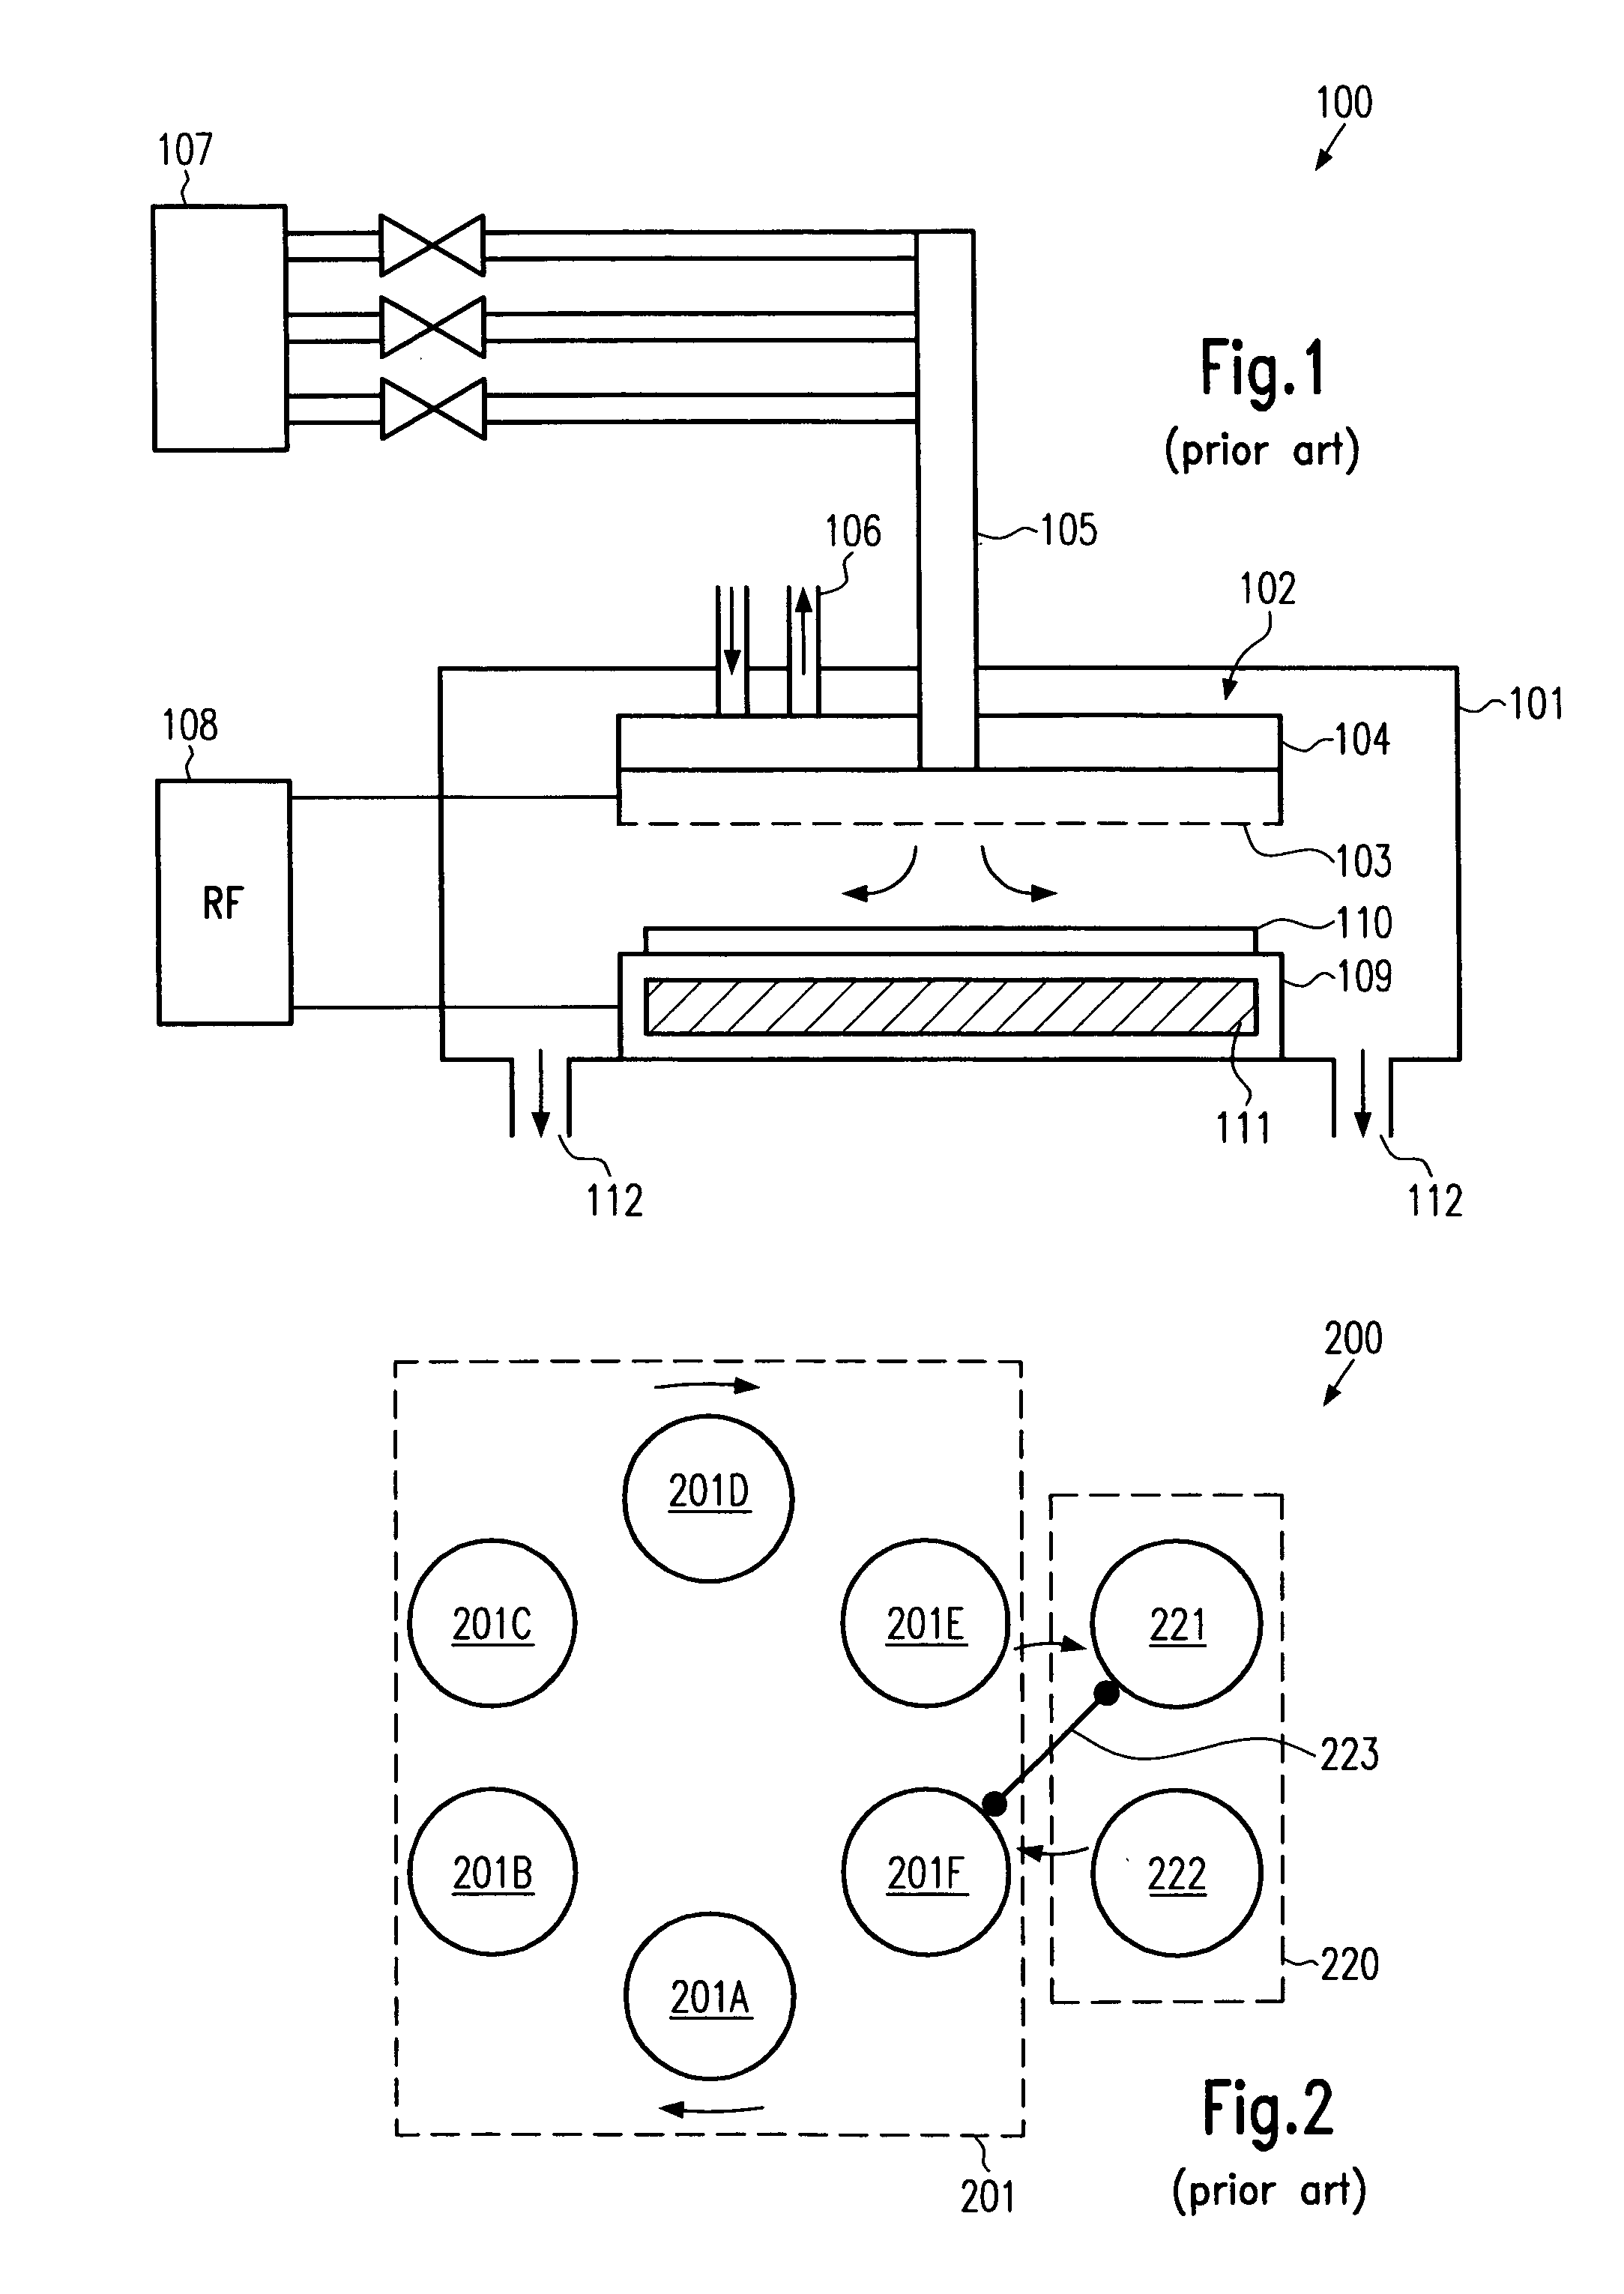 Method of improving the wafer-to-wafer thickness uniformity of silicon nitride layers